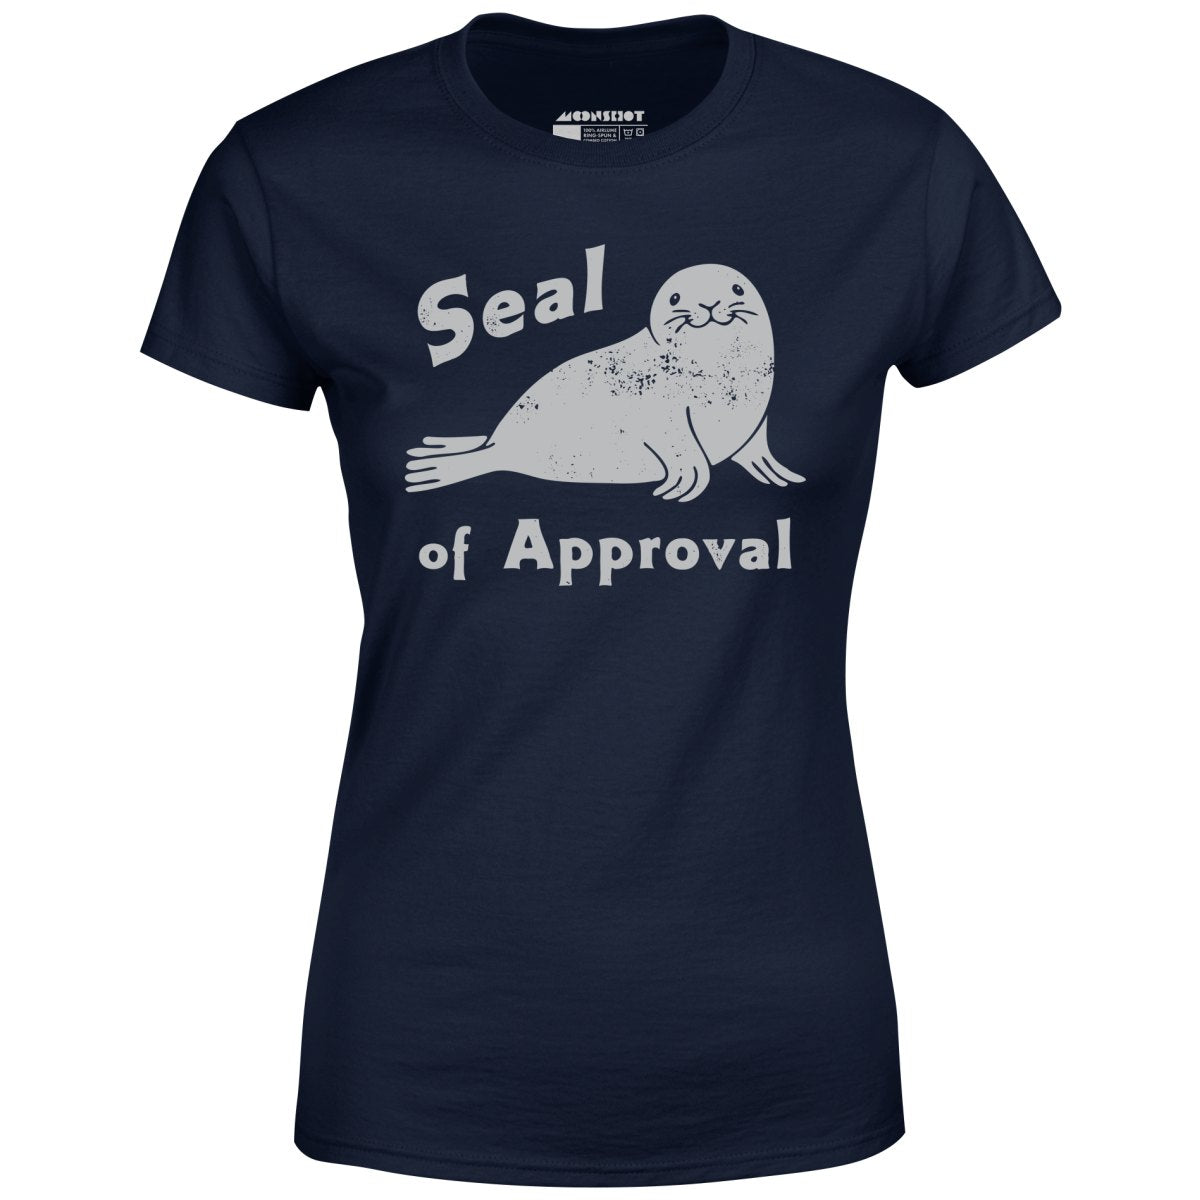 Seal of Approval - Women's T-Shirt